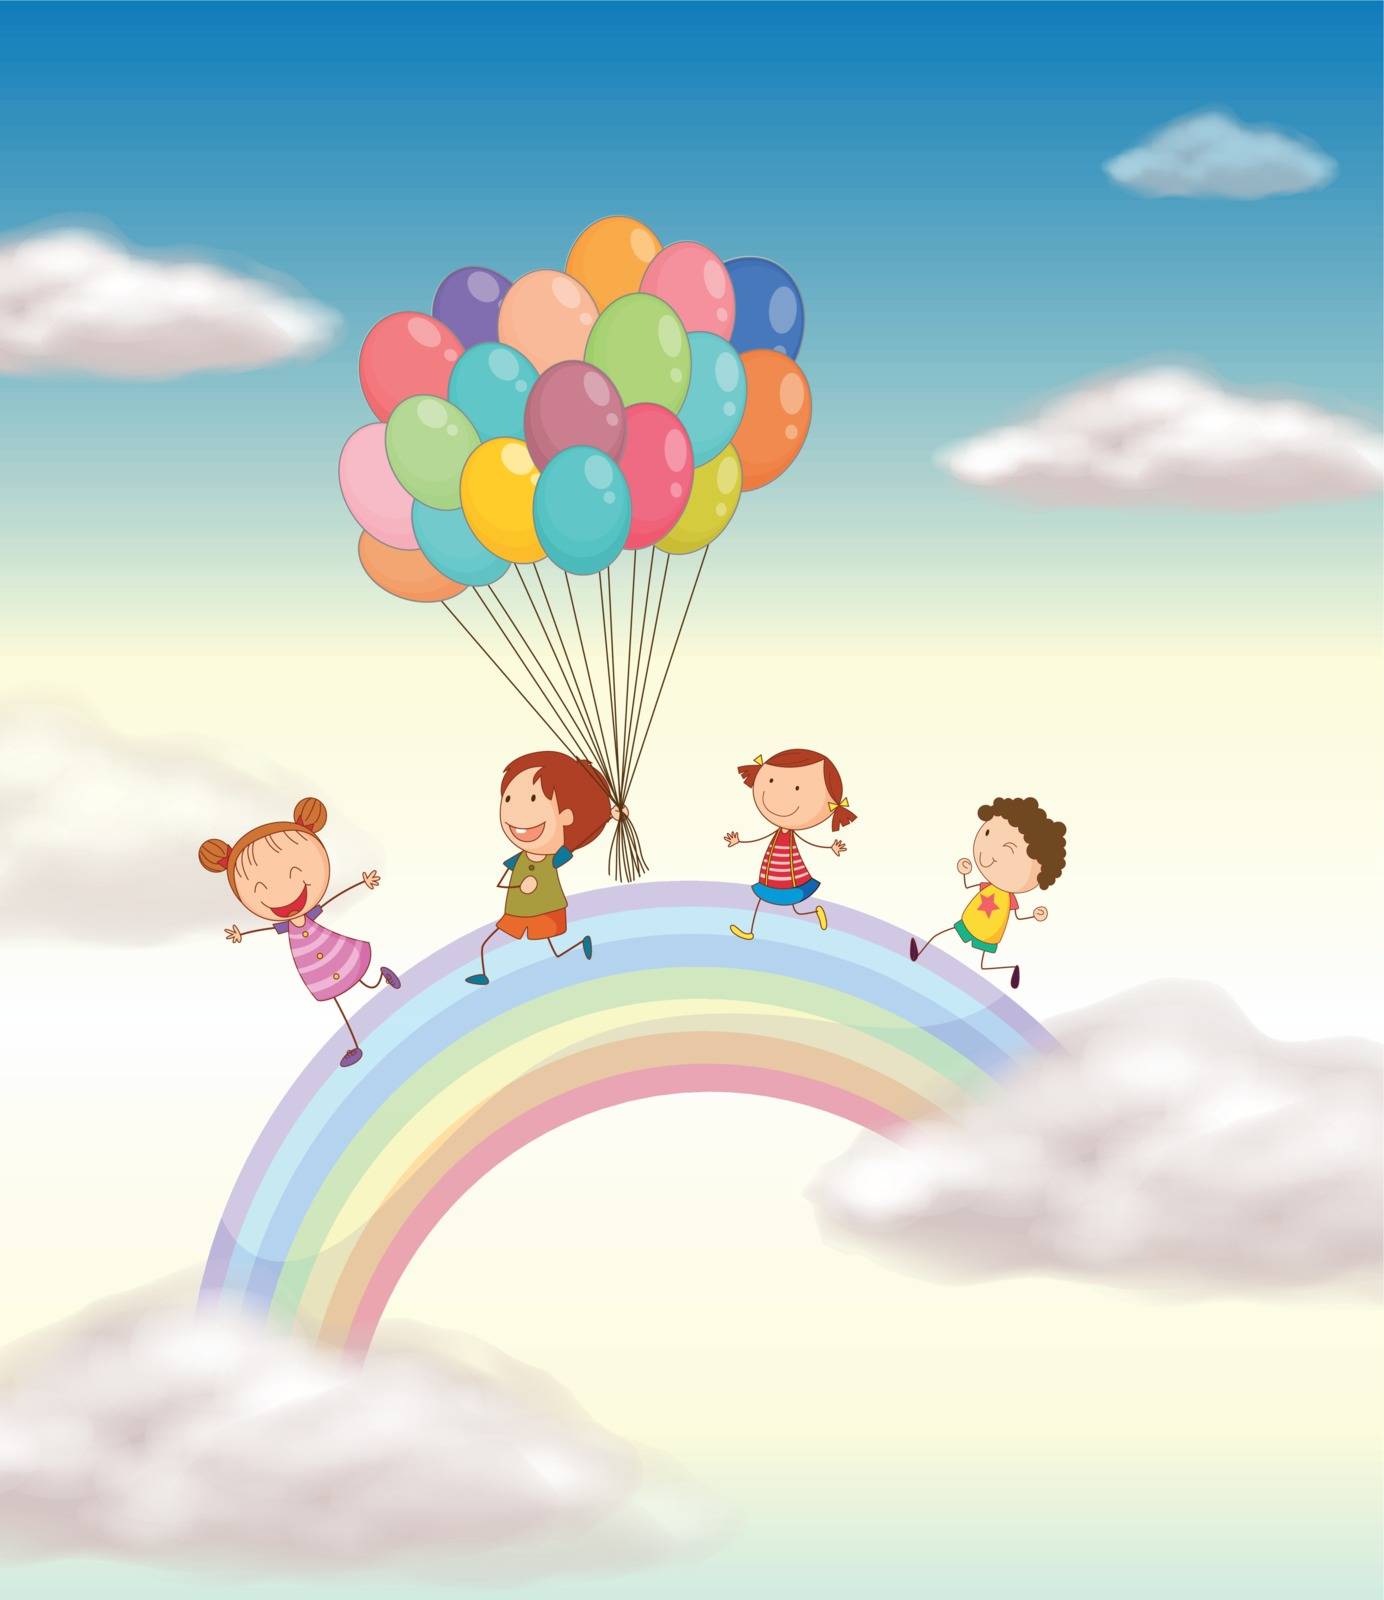 illustration of a kids playing with balloons in the sky